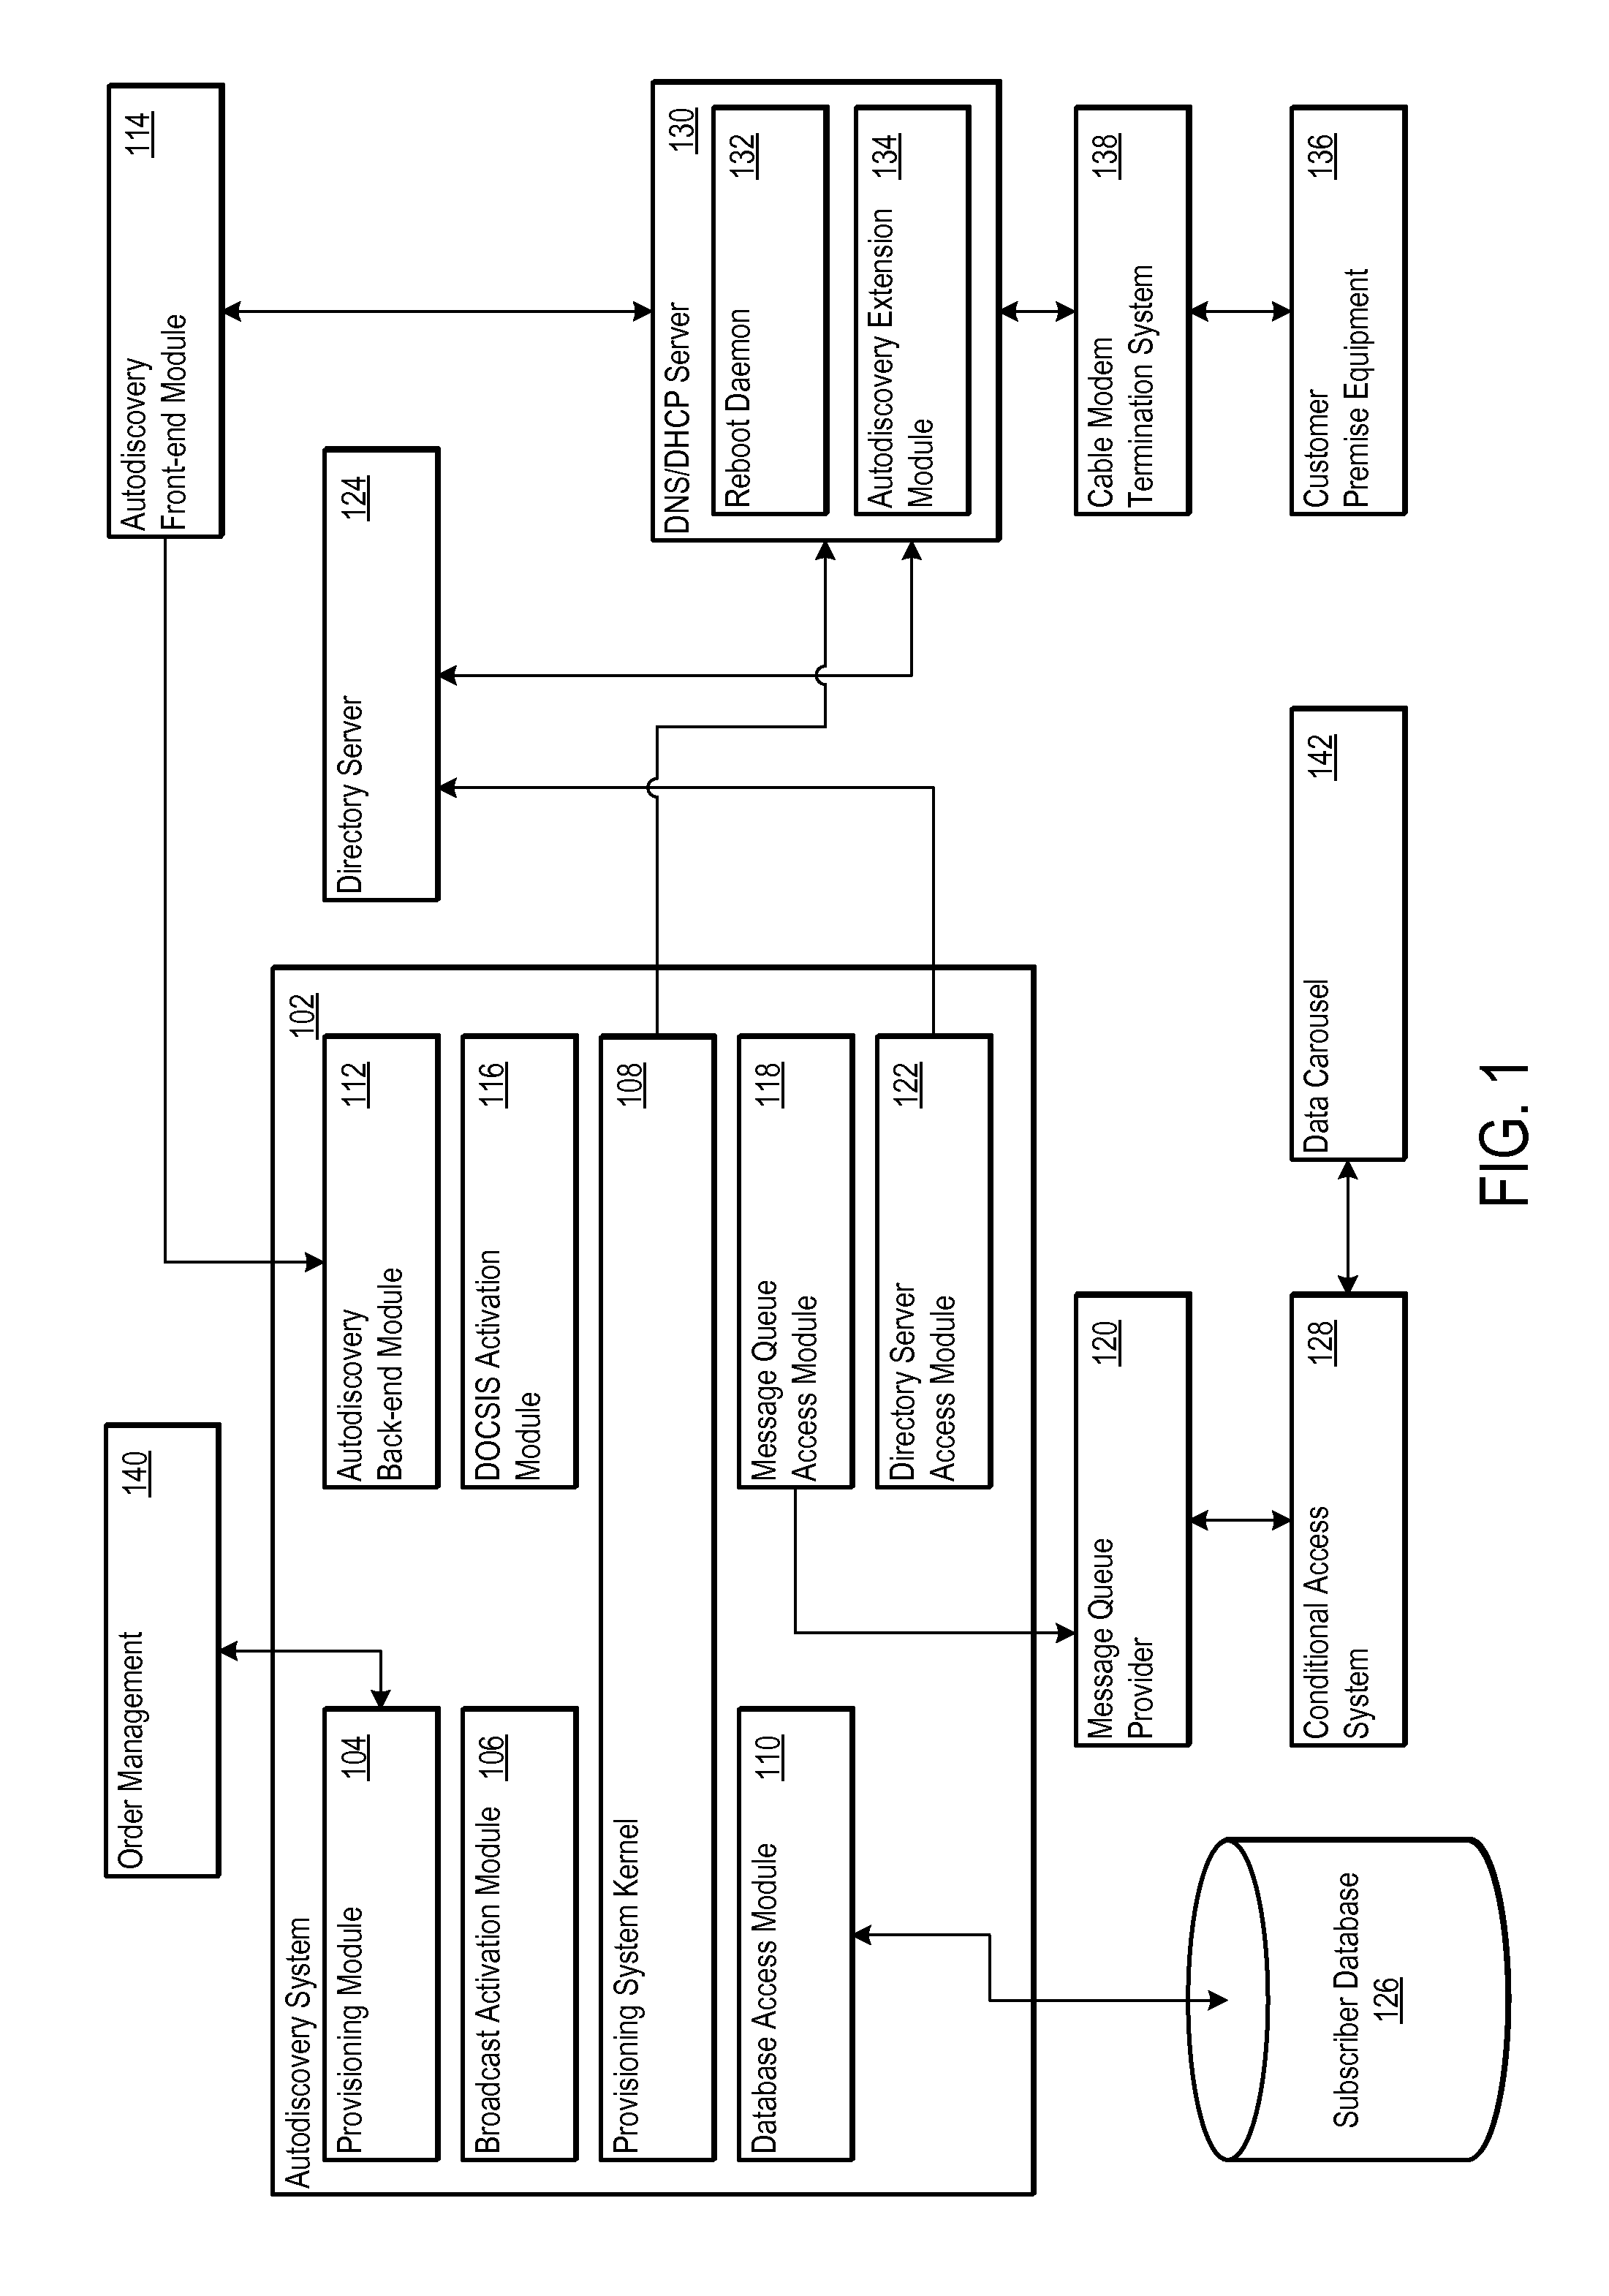 Network autodiscovery as a lever to decorrelated service activation through event driven architecture